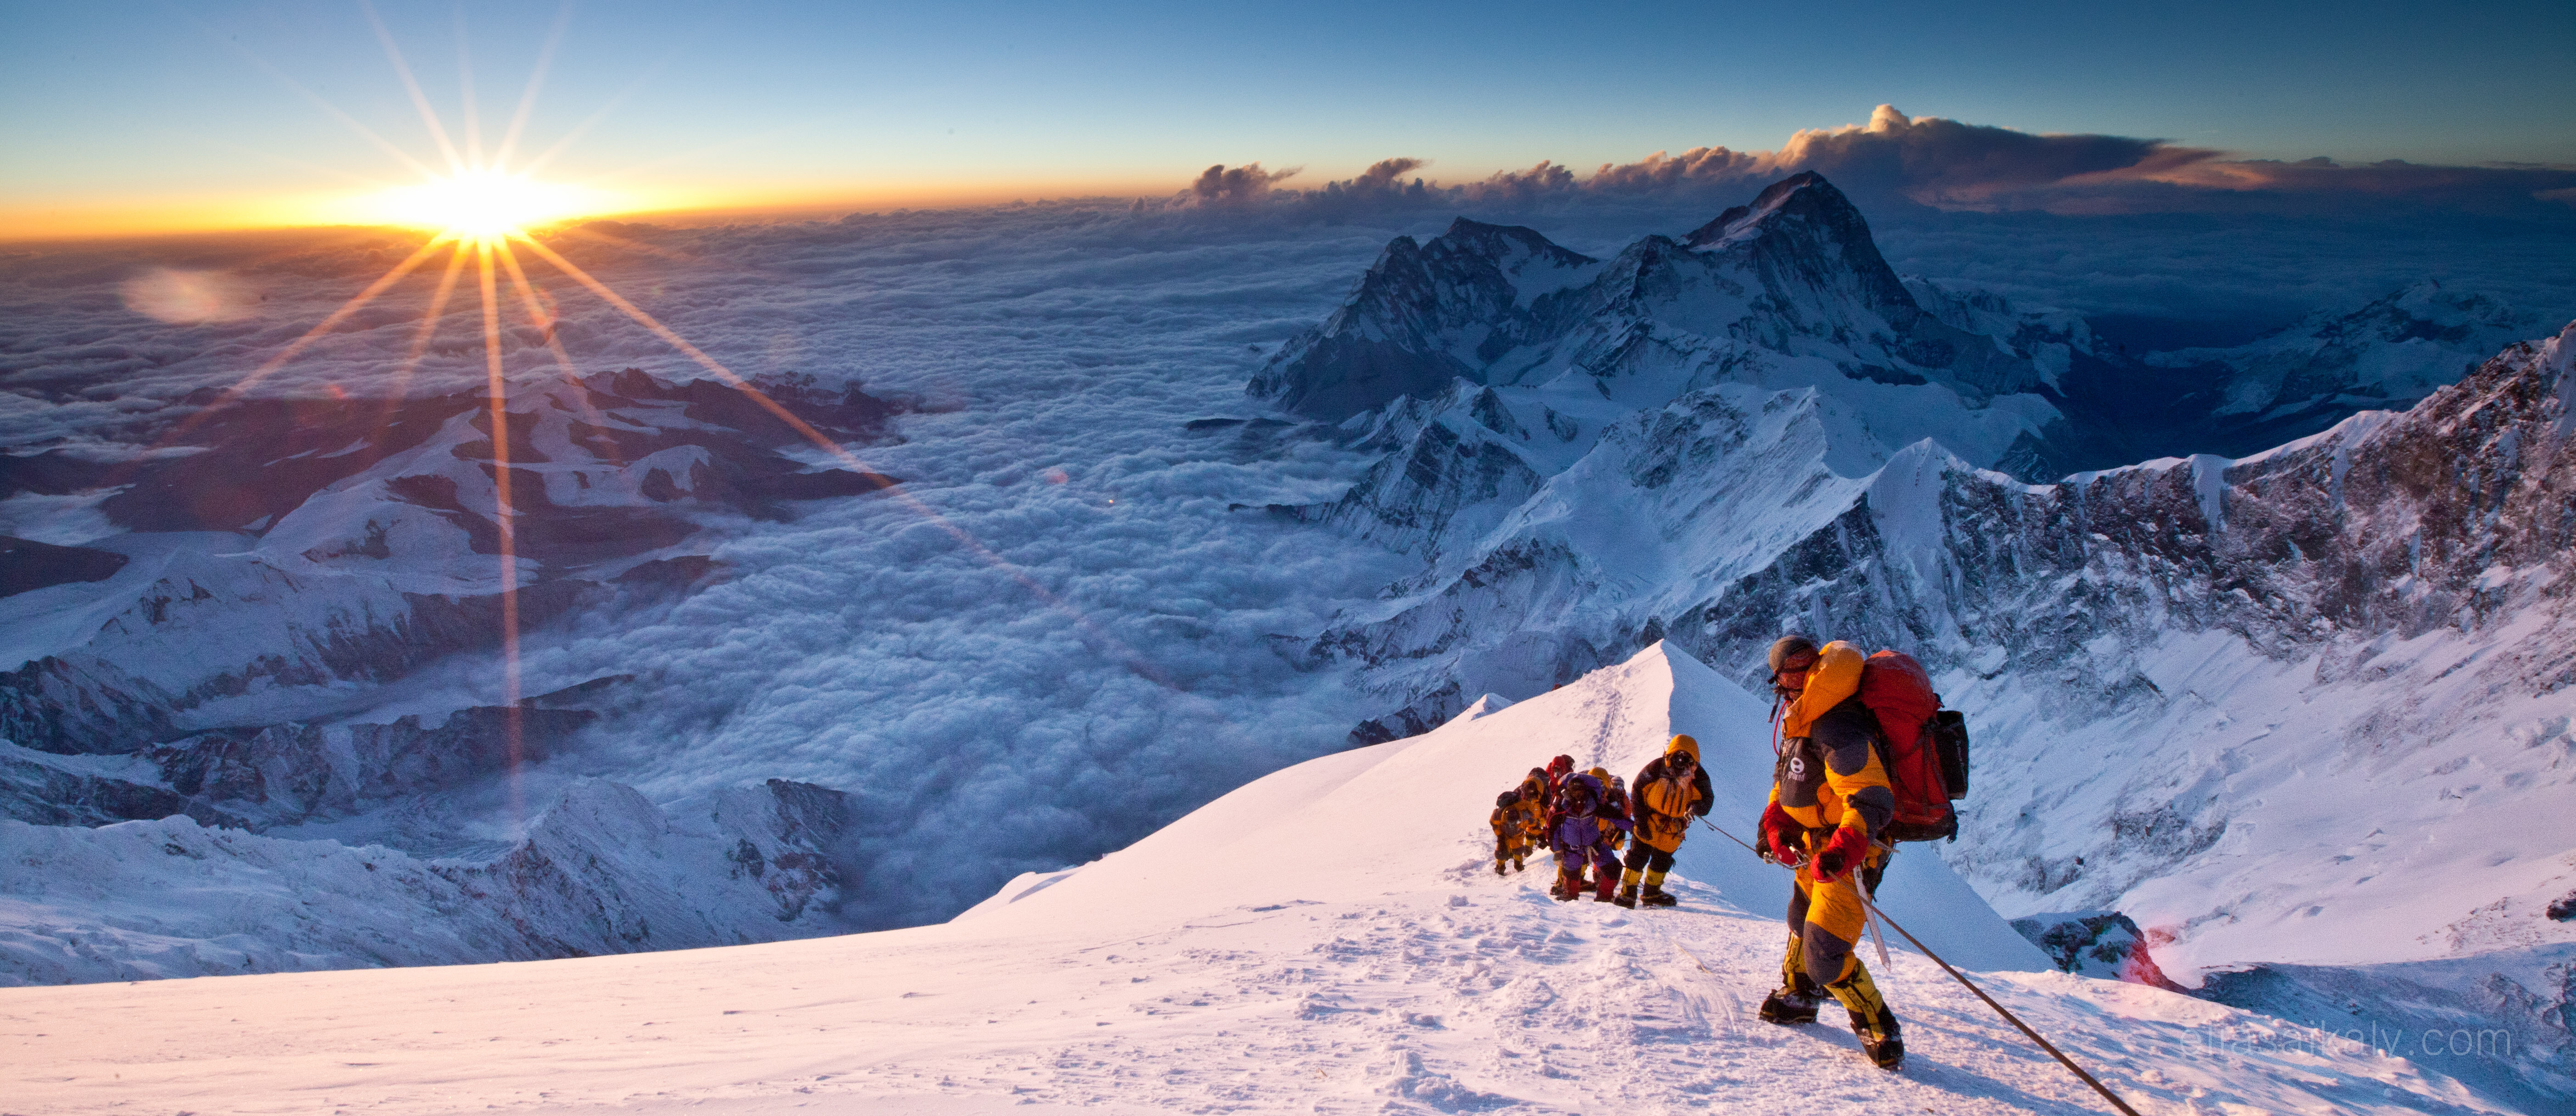 Nice Images Collection: Everest Desktop Wallpapers